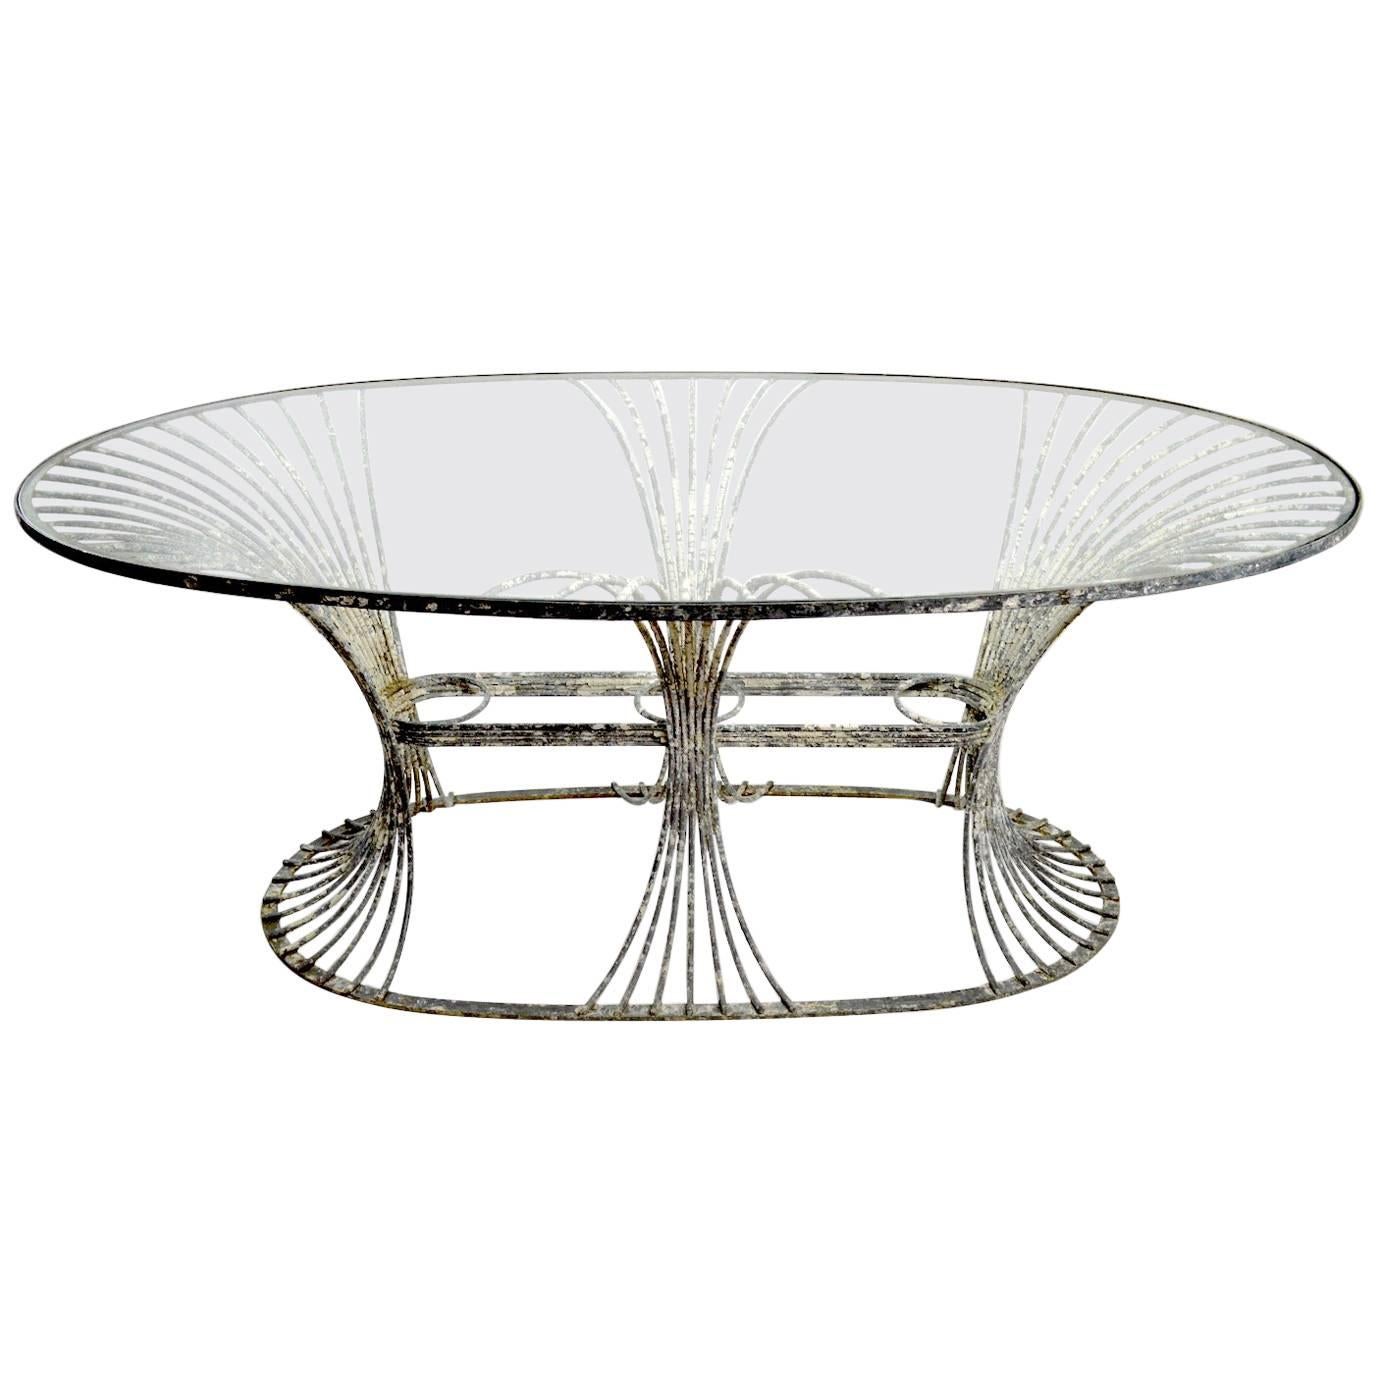 Rare Art Deco Garden Table by Leinfelder in Zinc and Glass